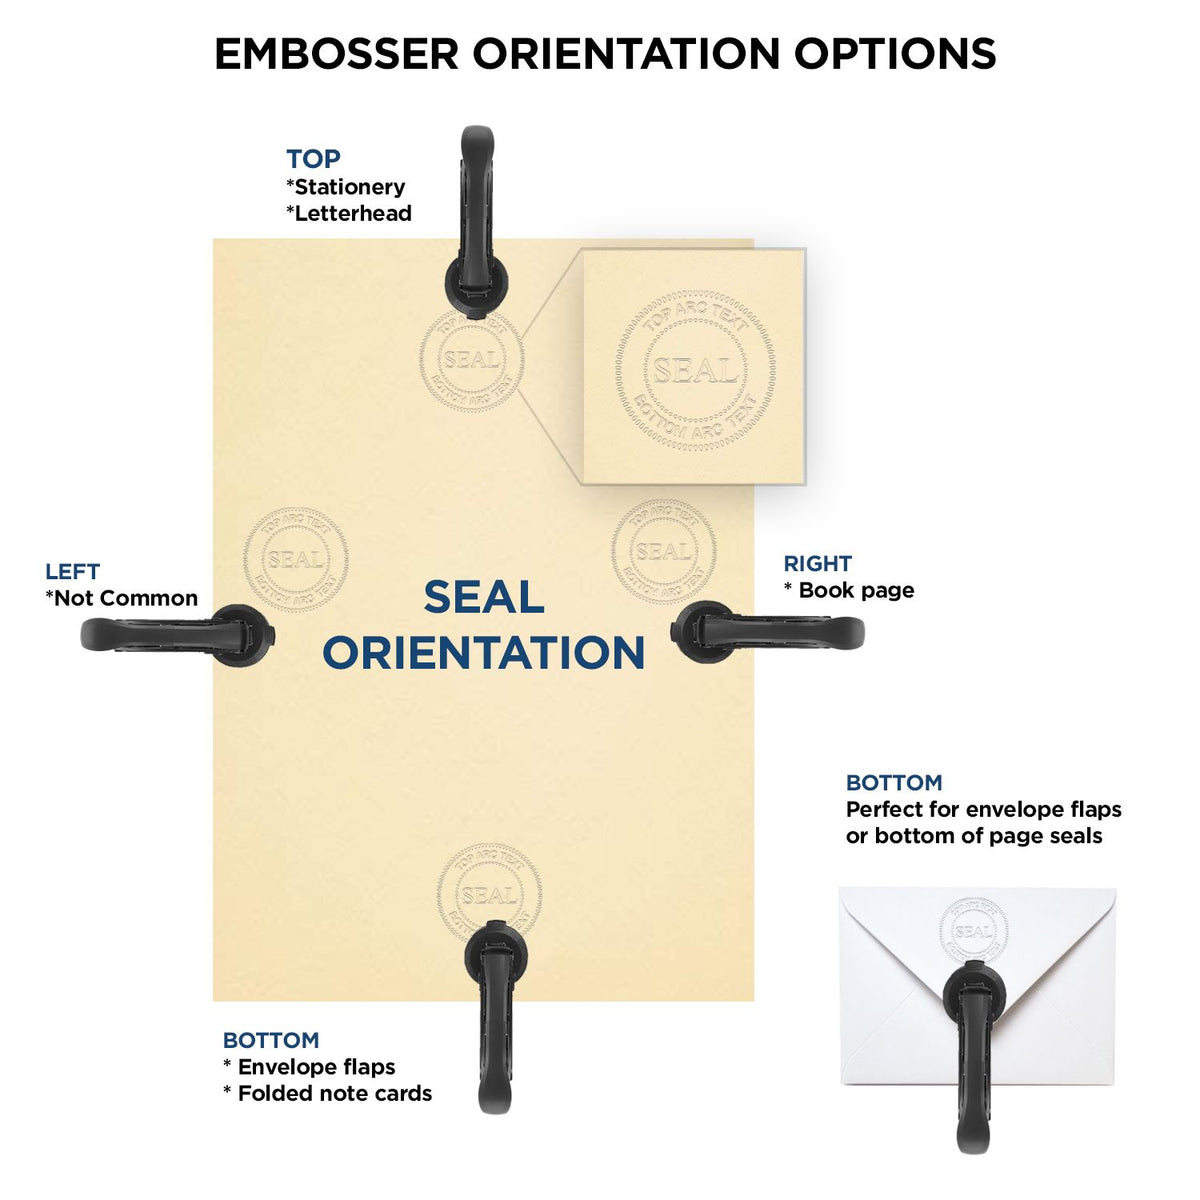 An infographic for the Soft New York Professional Engineer Seal showing embosser orientation, this is showing examples of a top, bottom, right and left insert.